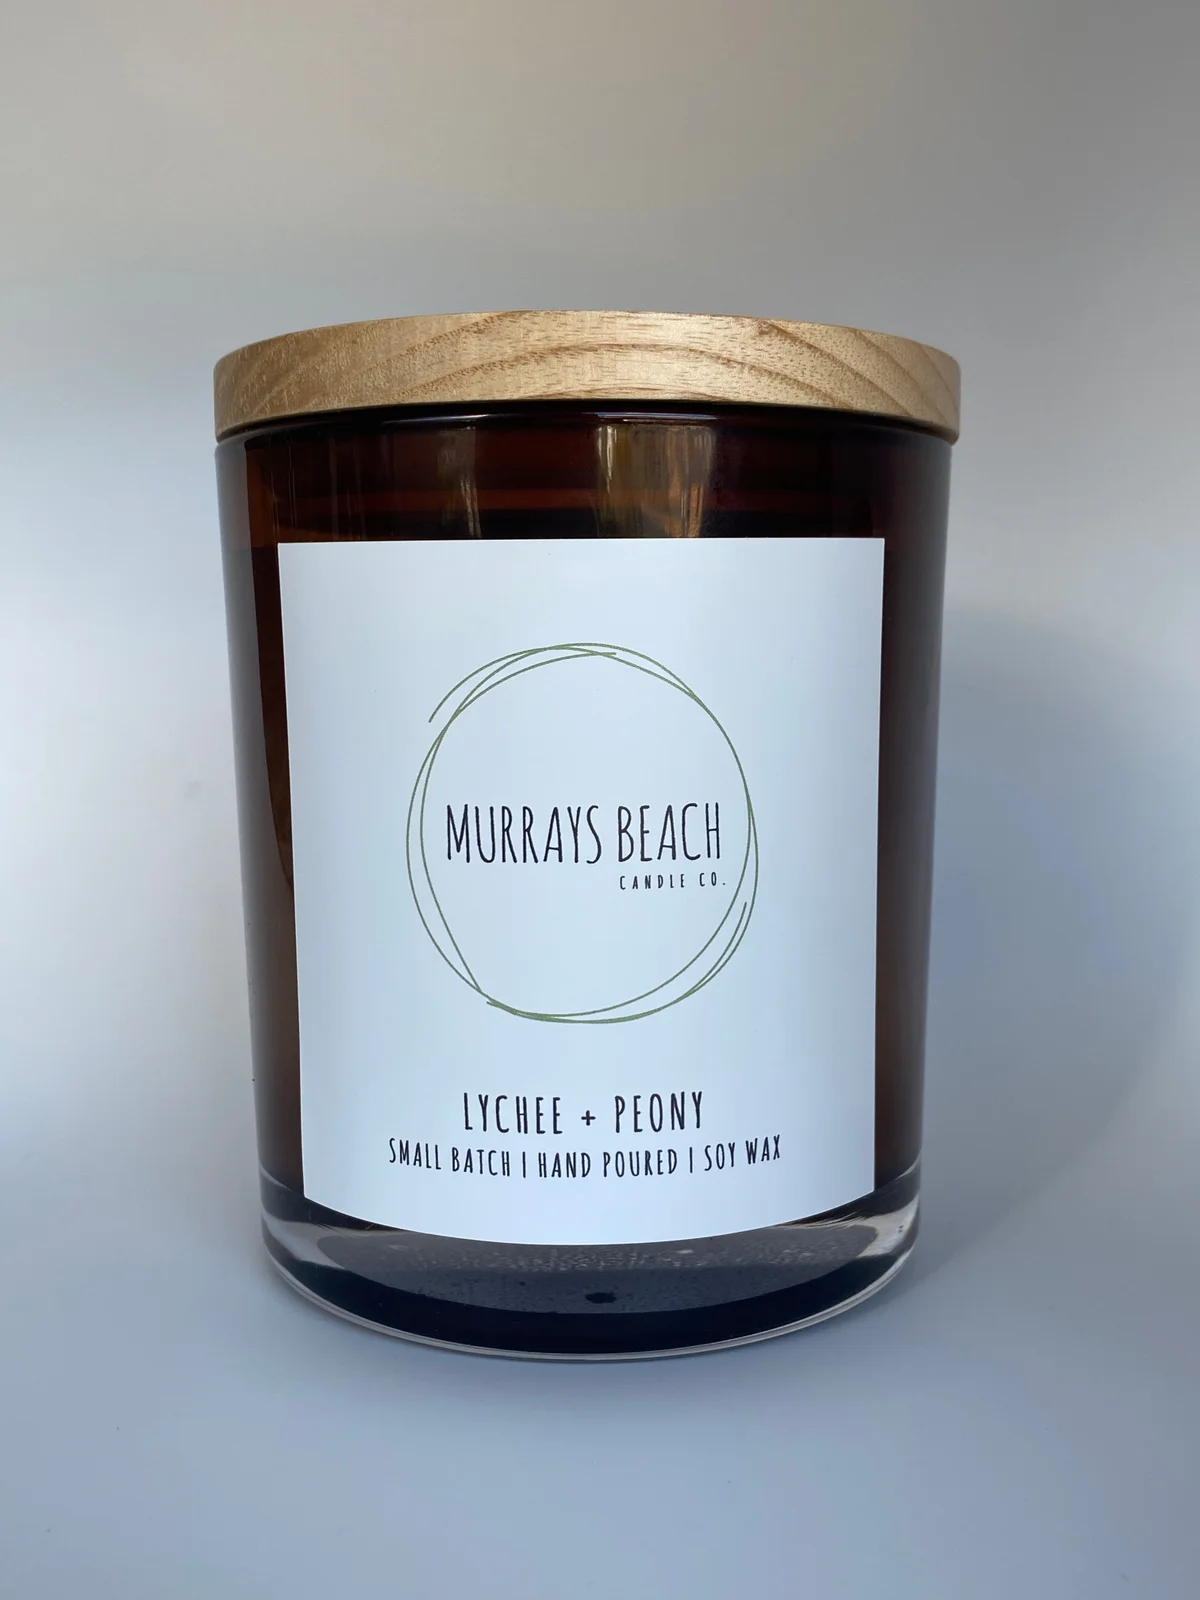 murrays beach candle co. in a glass jar with cover (lychee + peony)